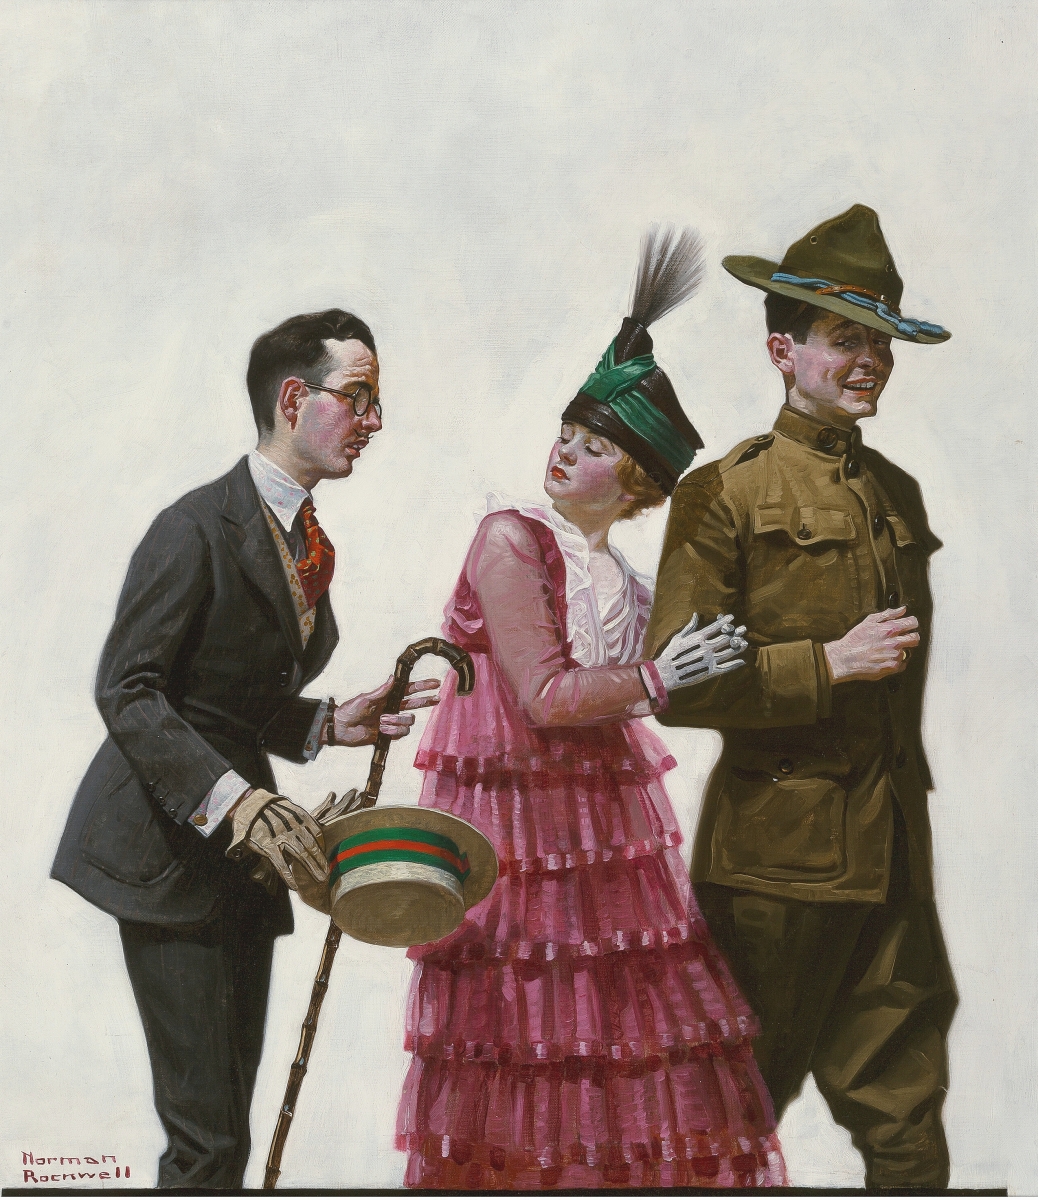 “Rockwell only did a few covers for Judge magazine; this is the best known one and now the record holder for a Judge cover,” Aviva Lehmann commented about “Excuse Me! (Soldier Escorting Woman)” by Norman Rockwell, which saw competition from three bidders and sold for $543,000 ($400/600,000).